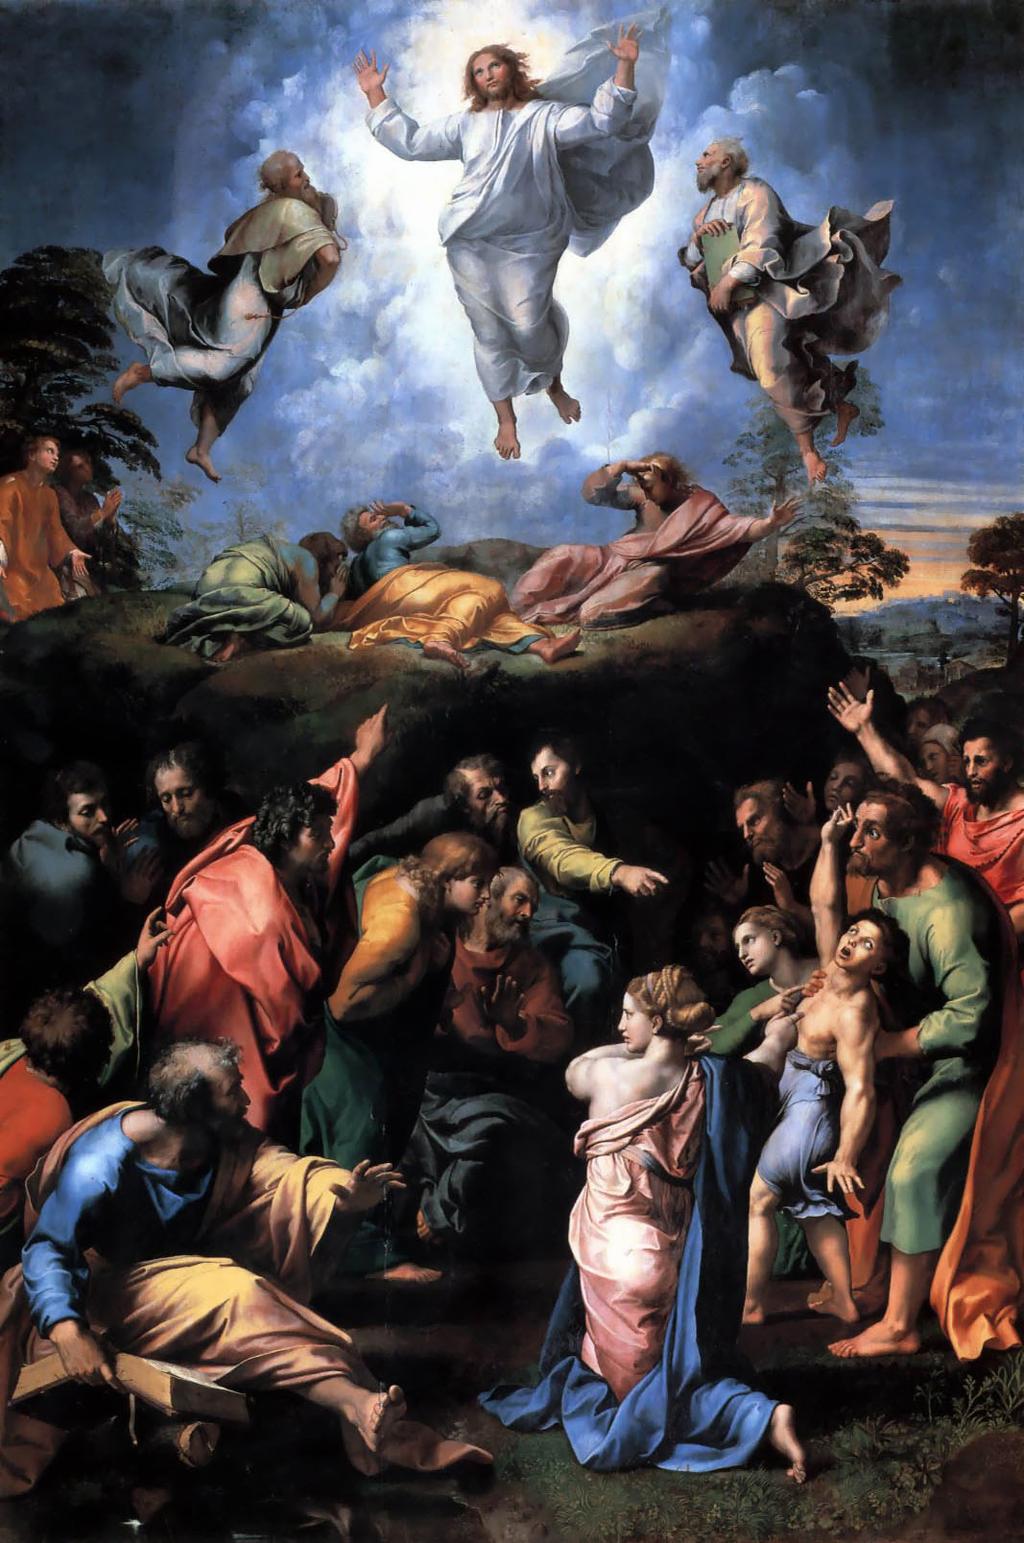 HANDOUT A Gospel Reading for February 25, 2018 A Reading from the Gospel of Mark 9:2-10: The Transfiguration of Jesus Jesus took Peter, James, and John and led them up a high mountain apart by